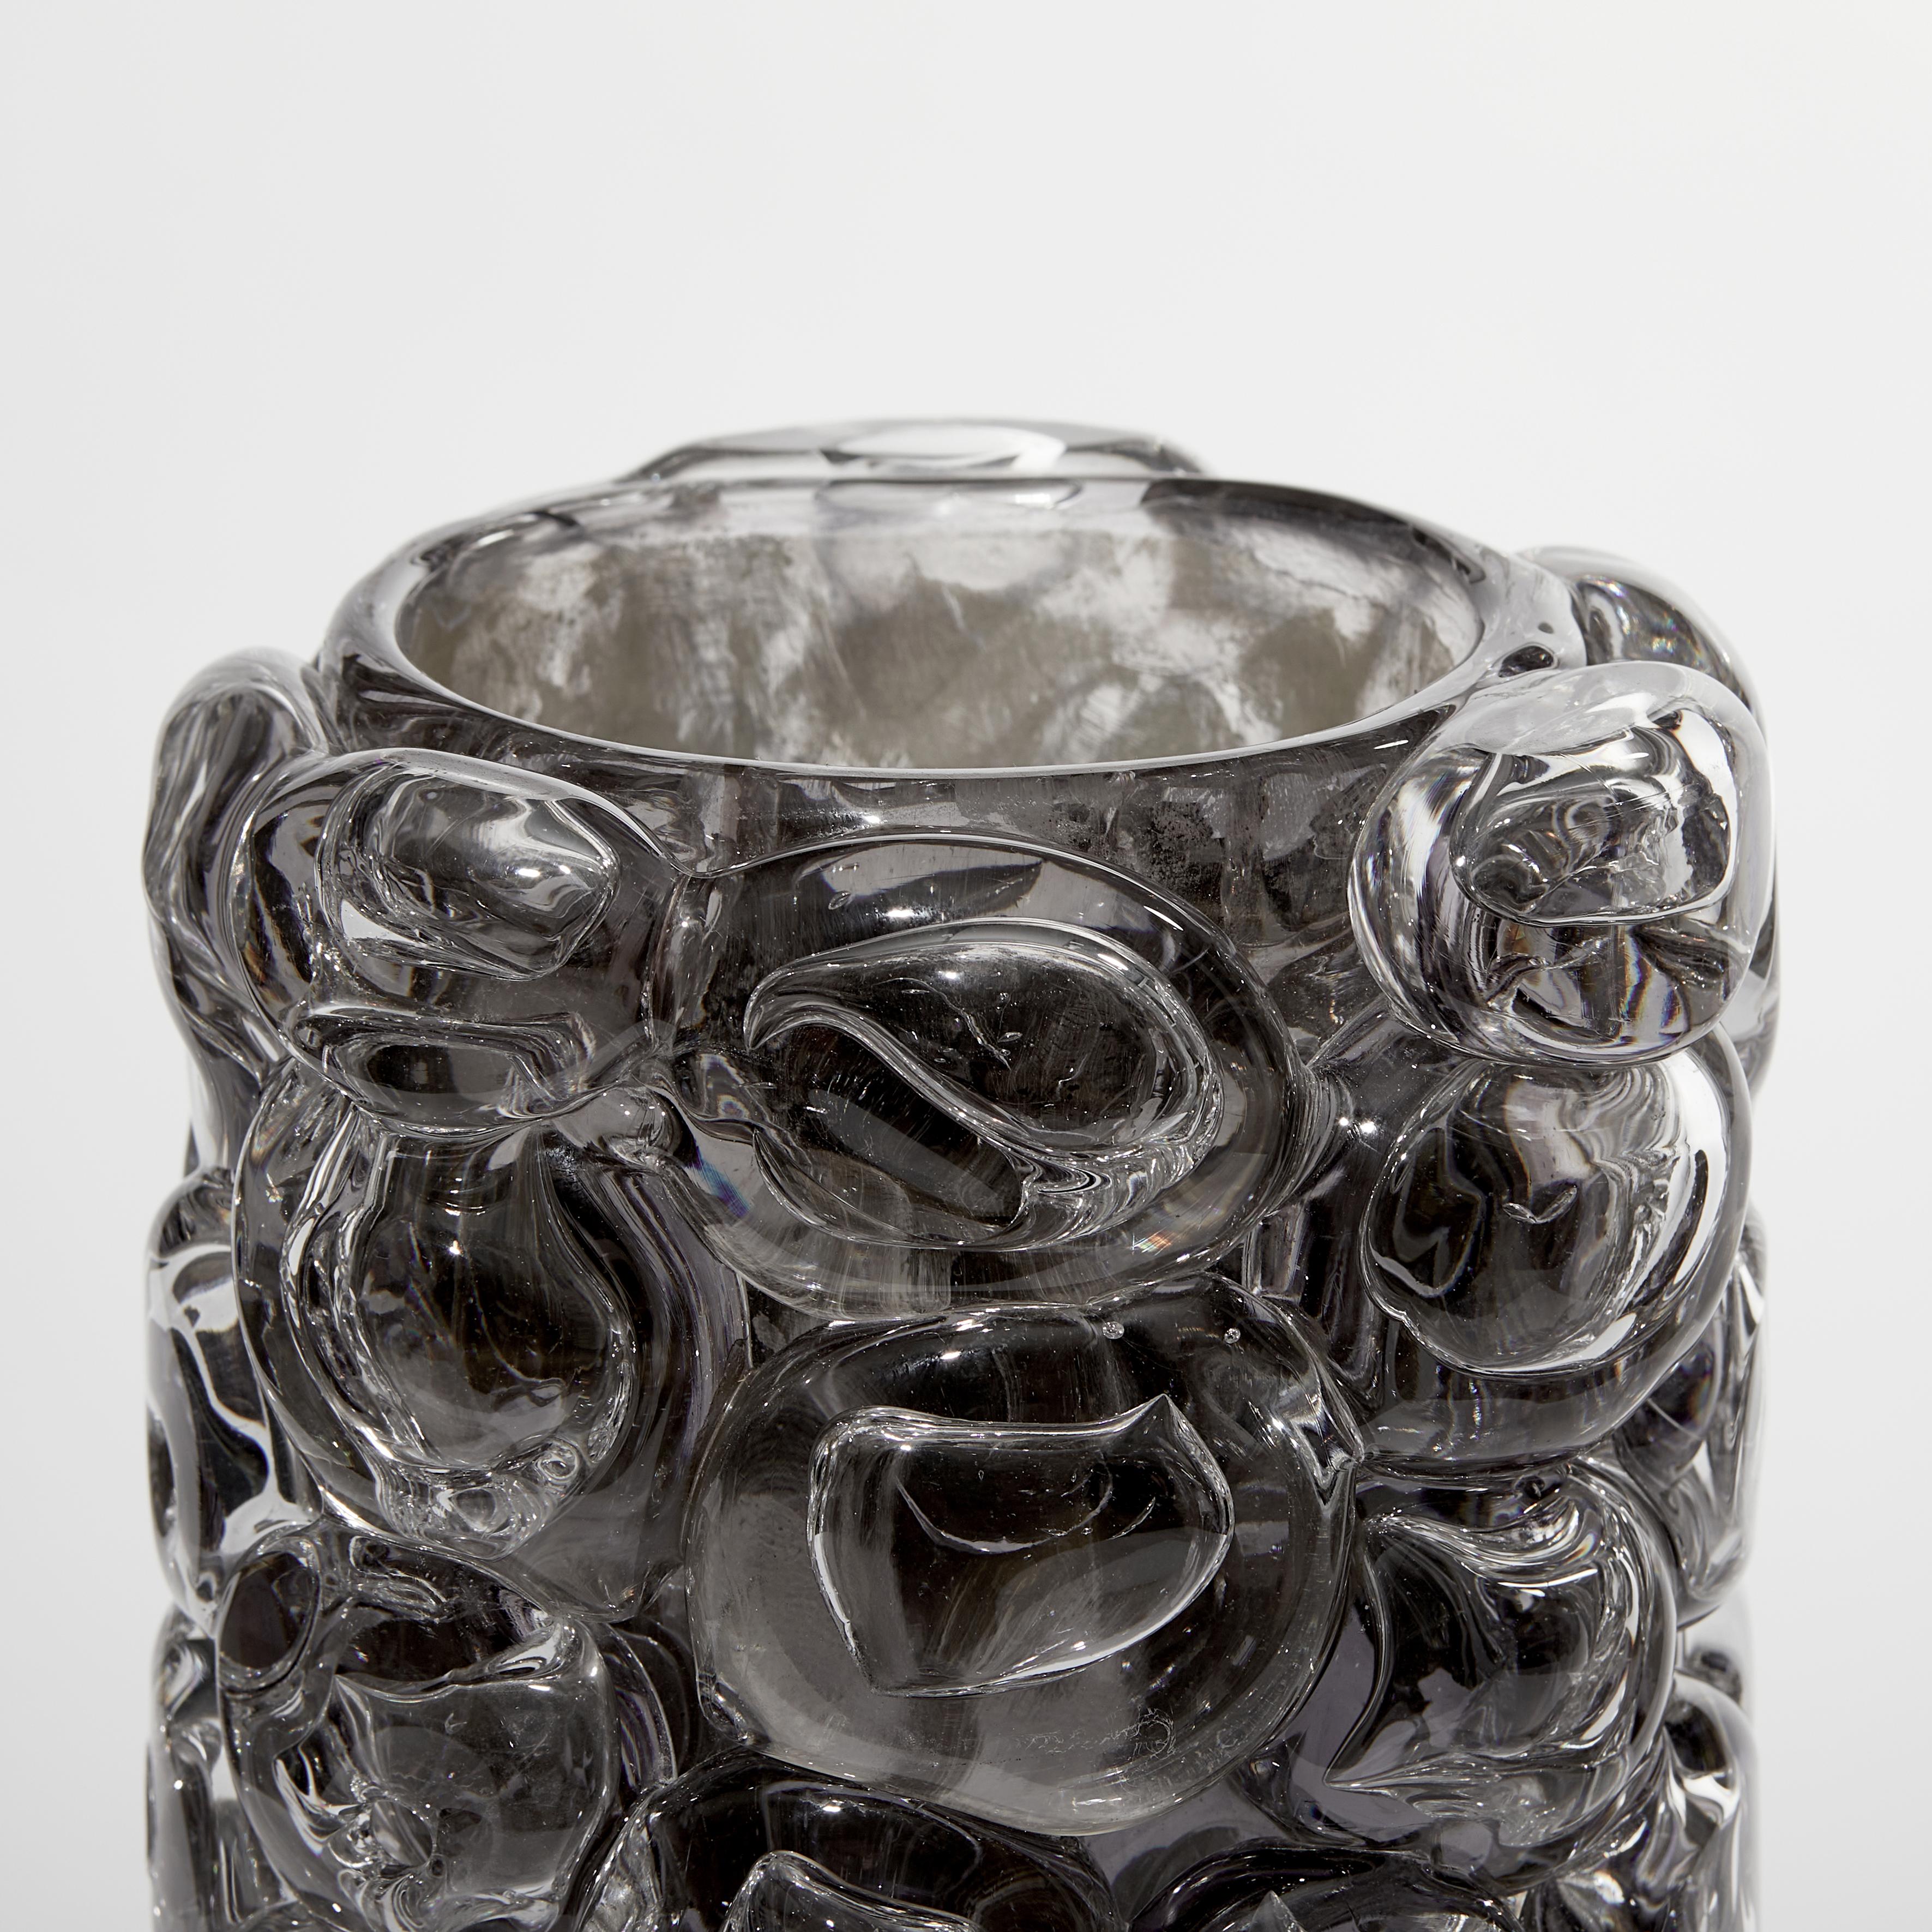 Bubblewrap in Monochrome II, a Silver and Clear Glass Vase by Allister Malcolm 3